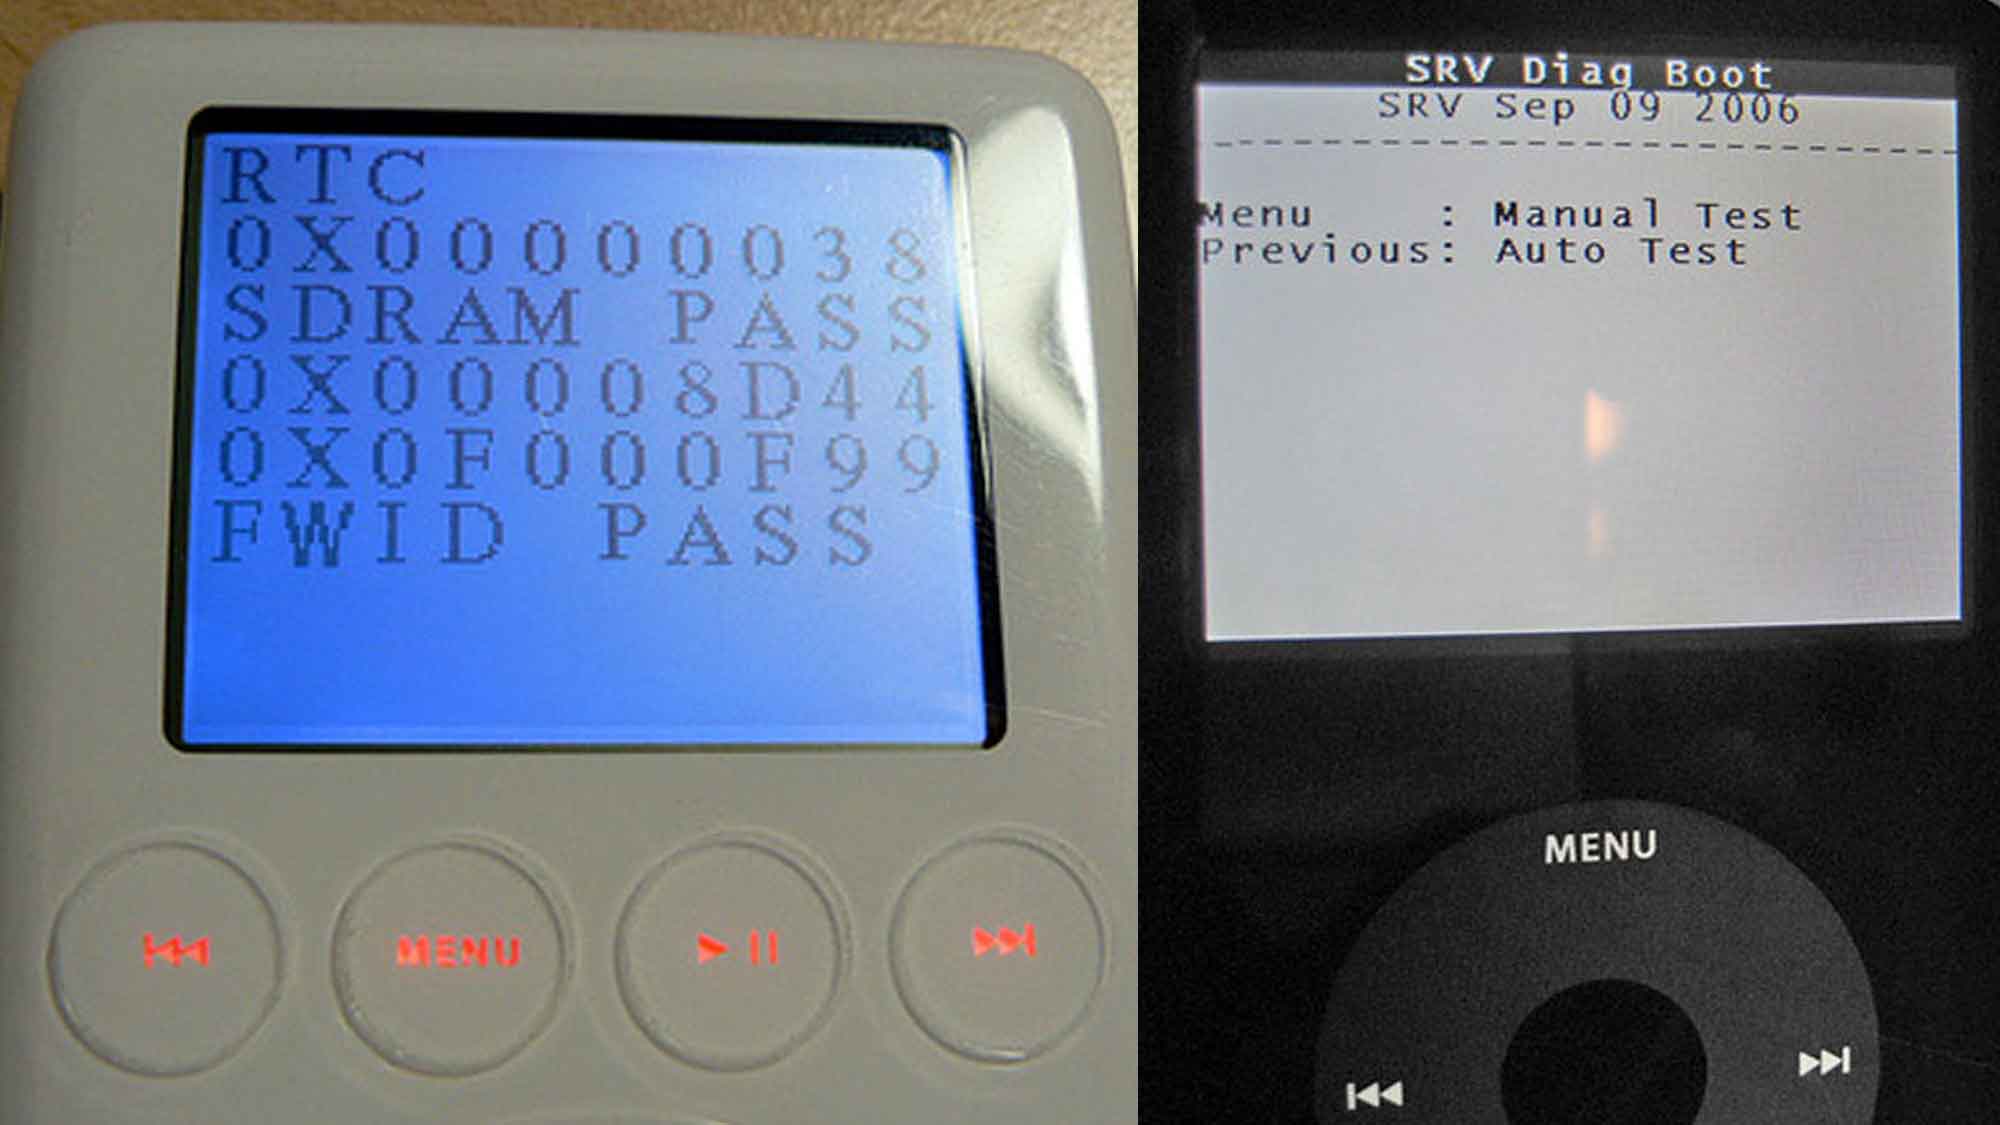 How To Enable iPod Diagnostic Mode And Troubleshoot Your iPod